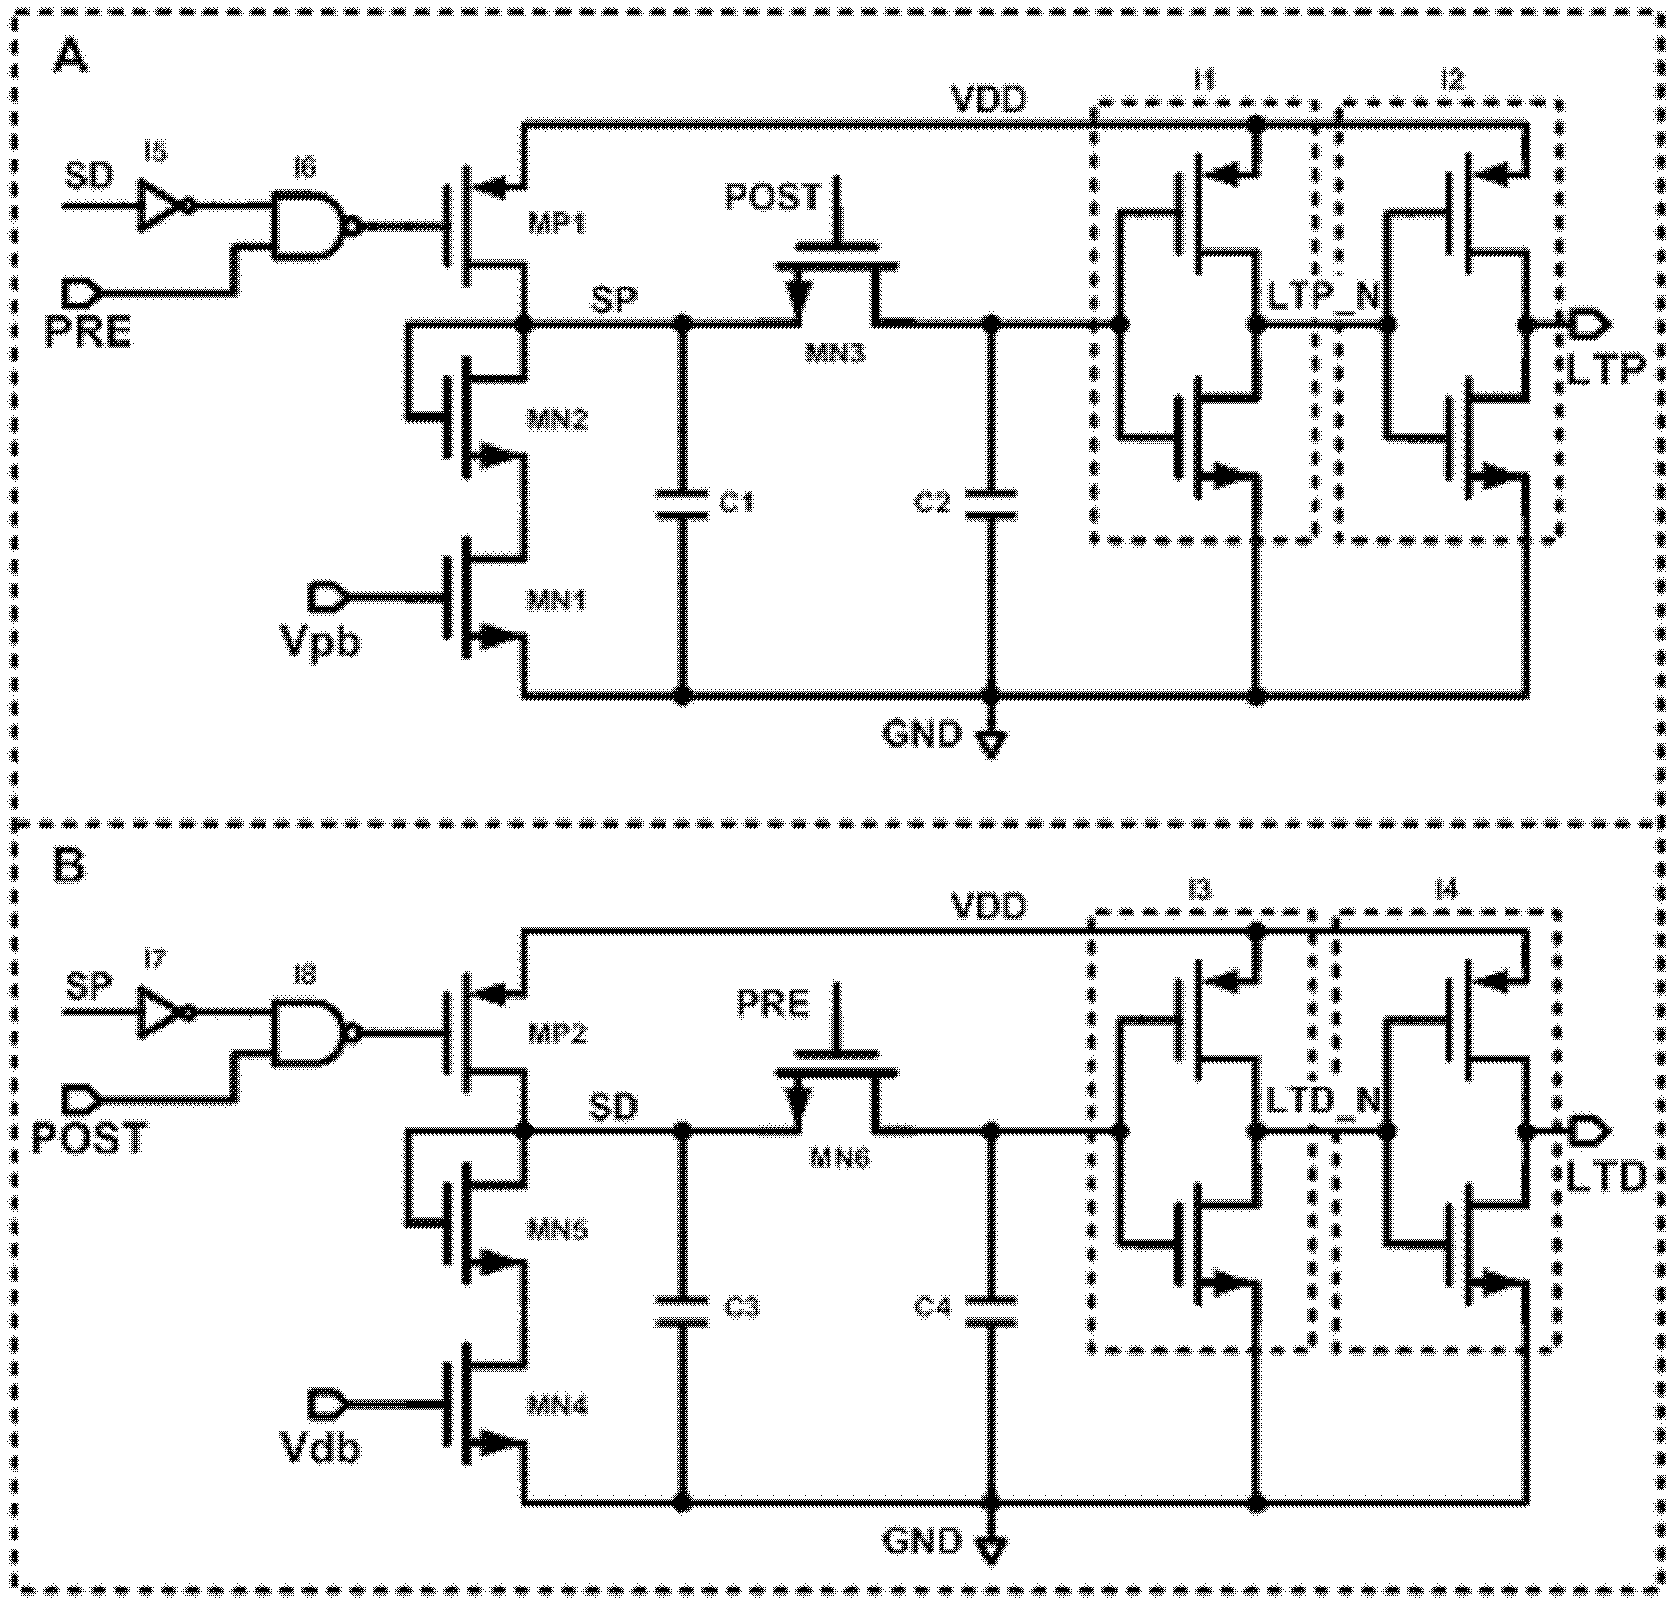 Weight adjustment circuit for variable-resistance synapses